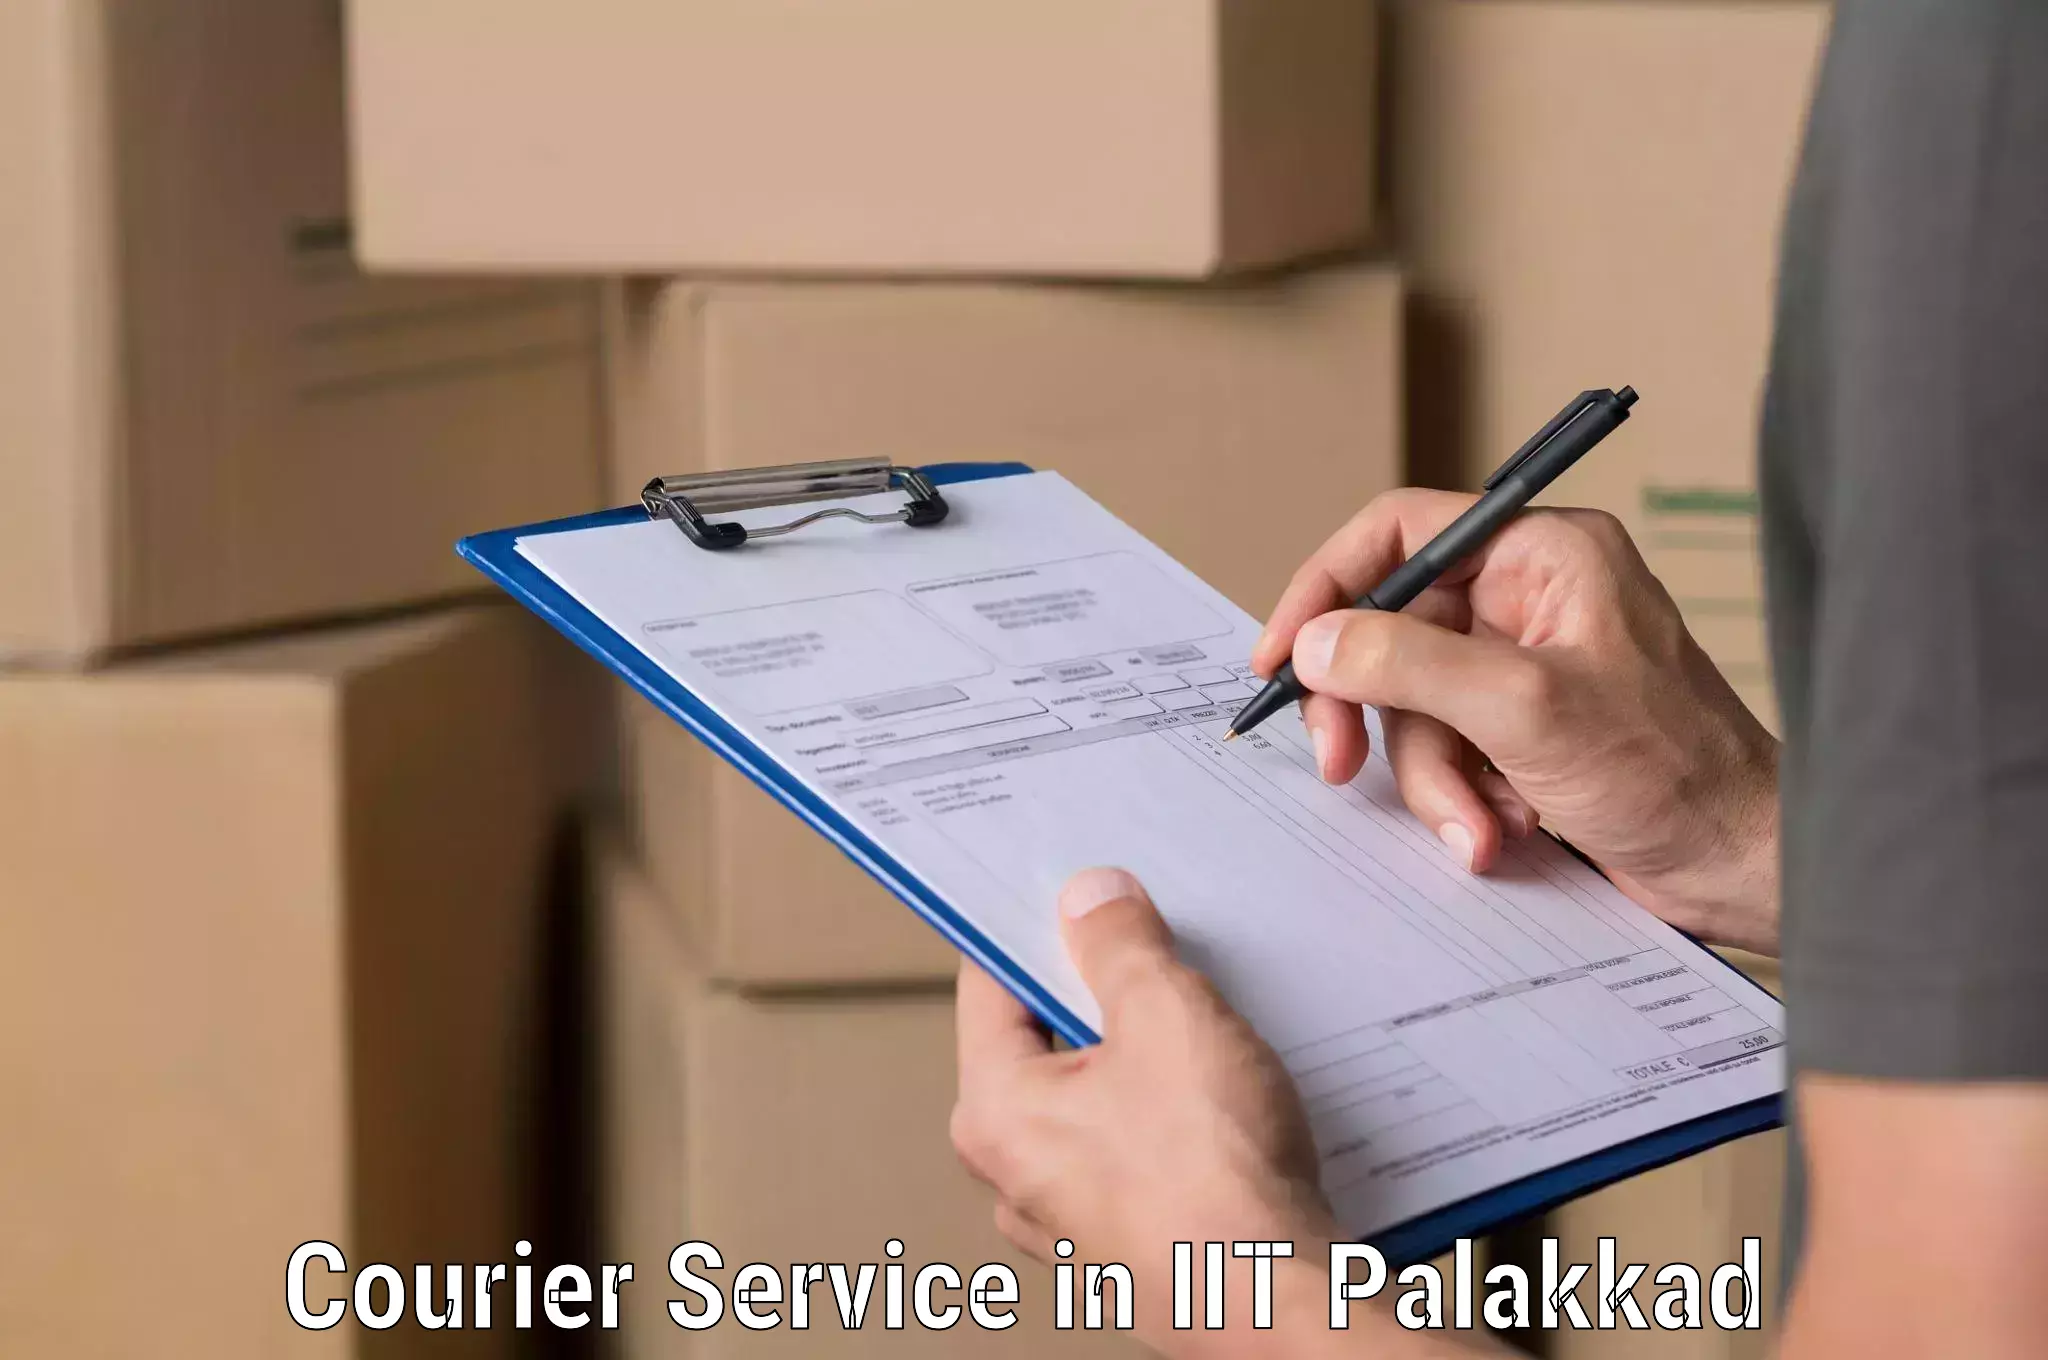 Customized delivery options in IIT Palakkad